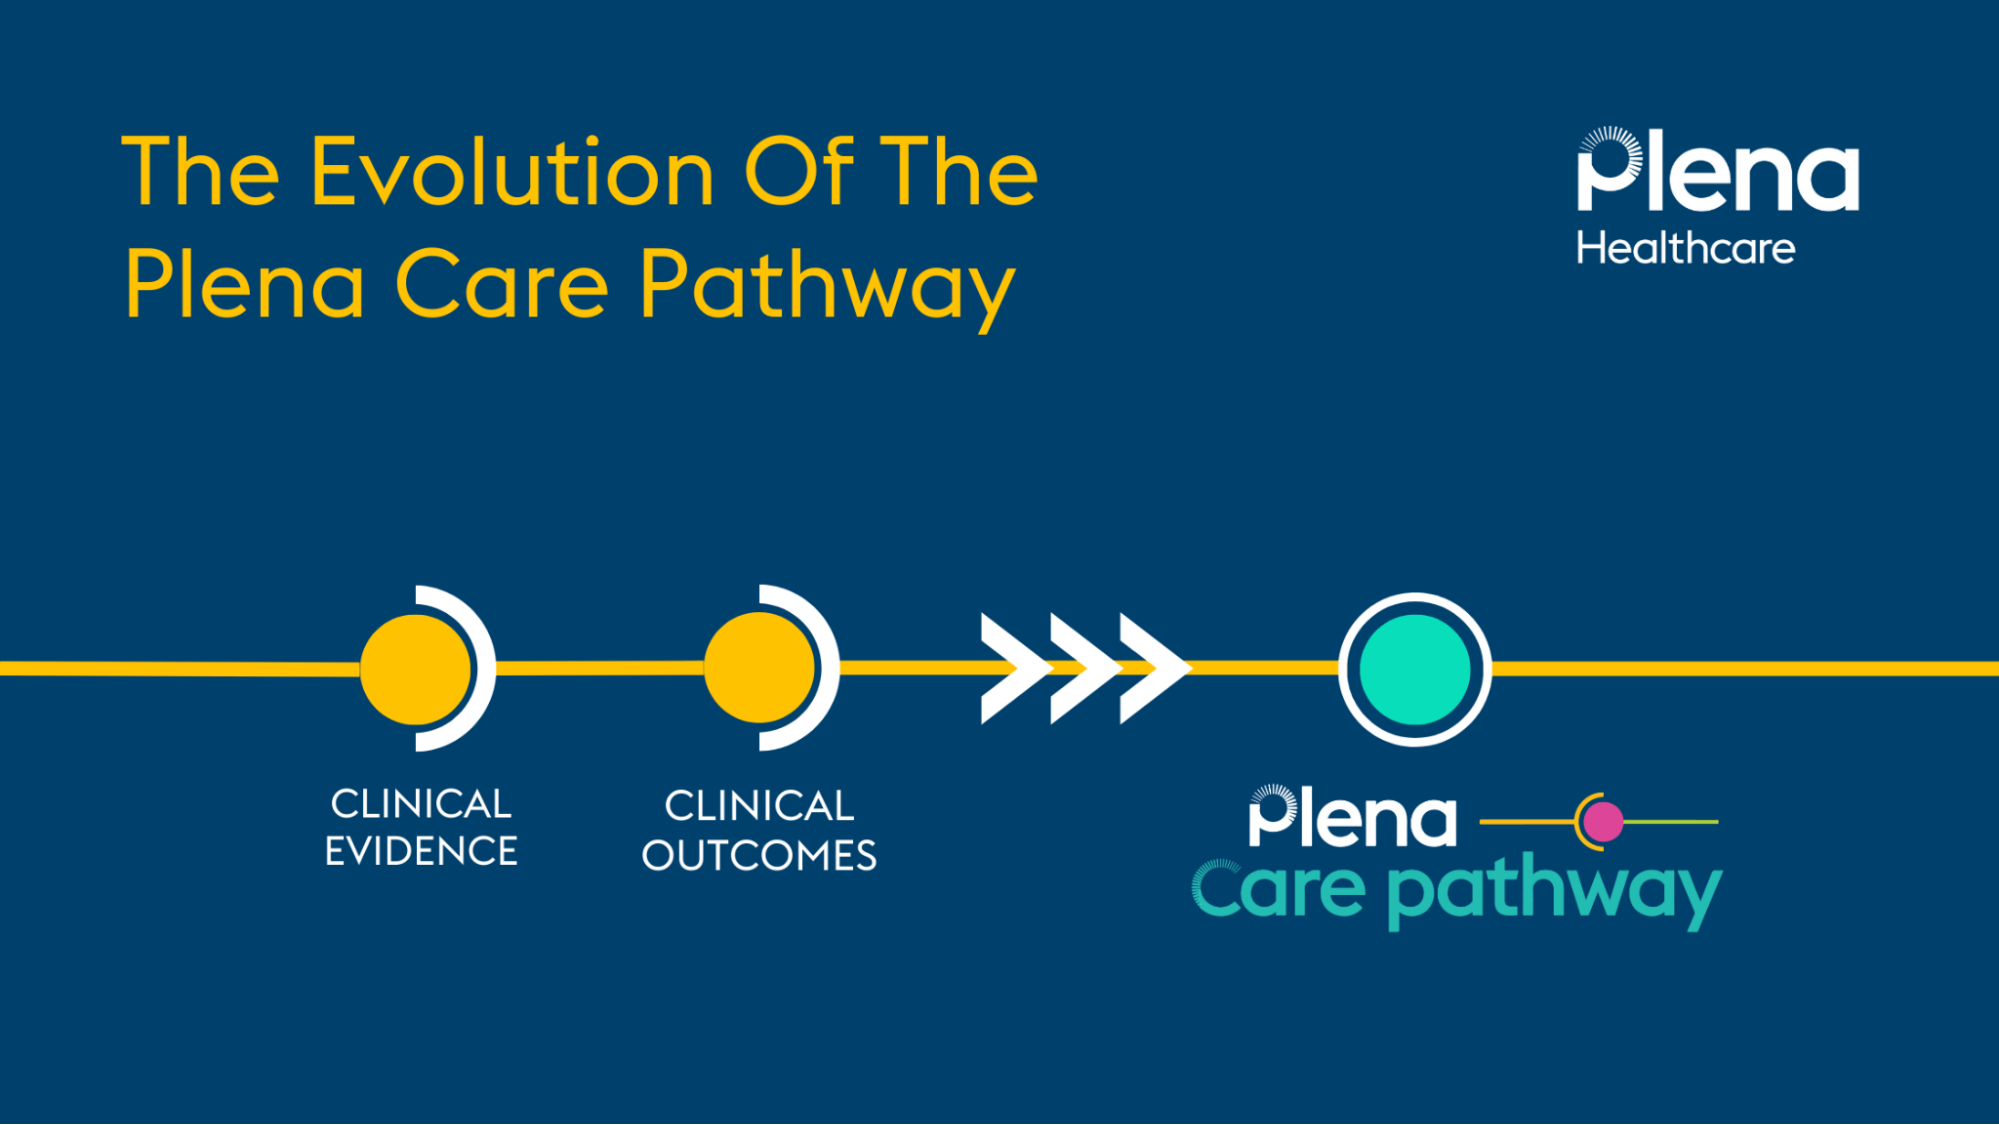 The Evolution of the Plena Care Pathway. A line leading from Clinical Evidence to Clinical Outcomes to Plena Care Pathway.